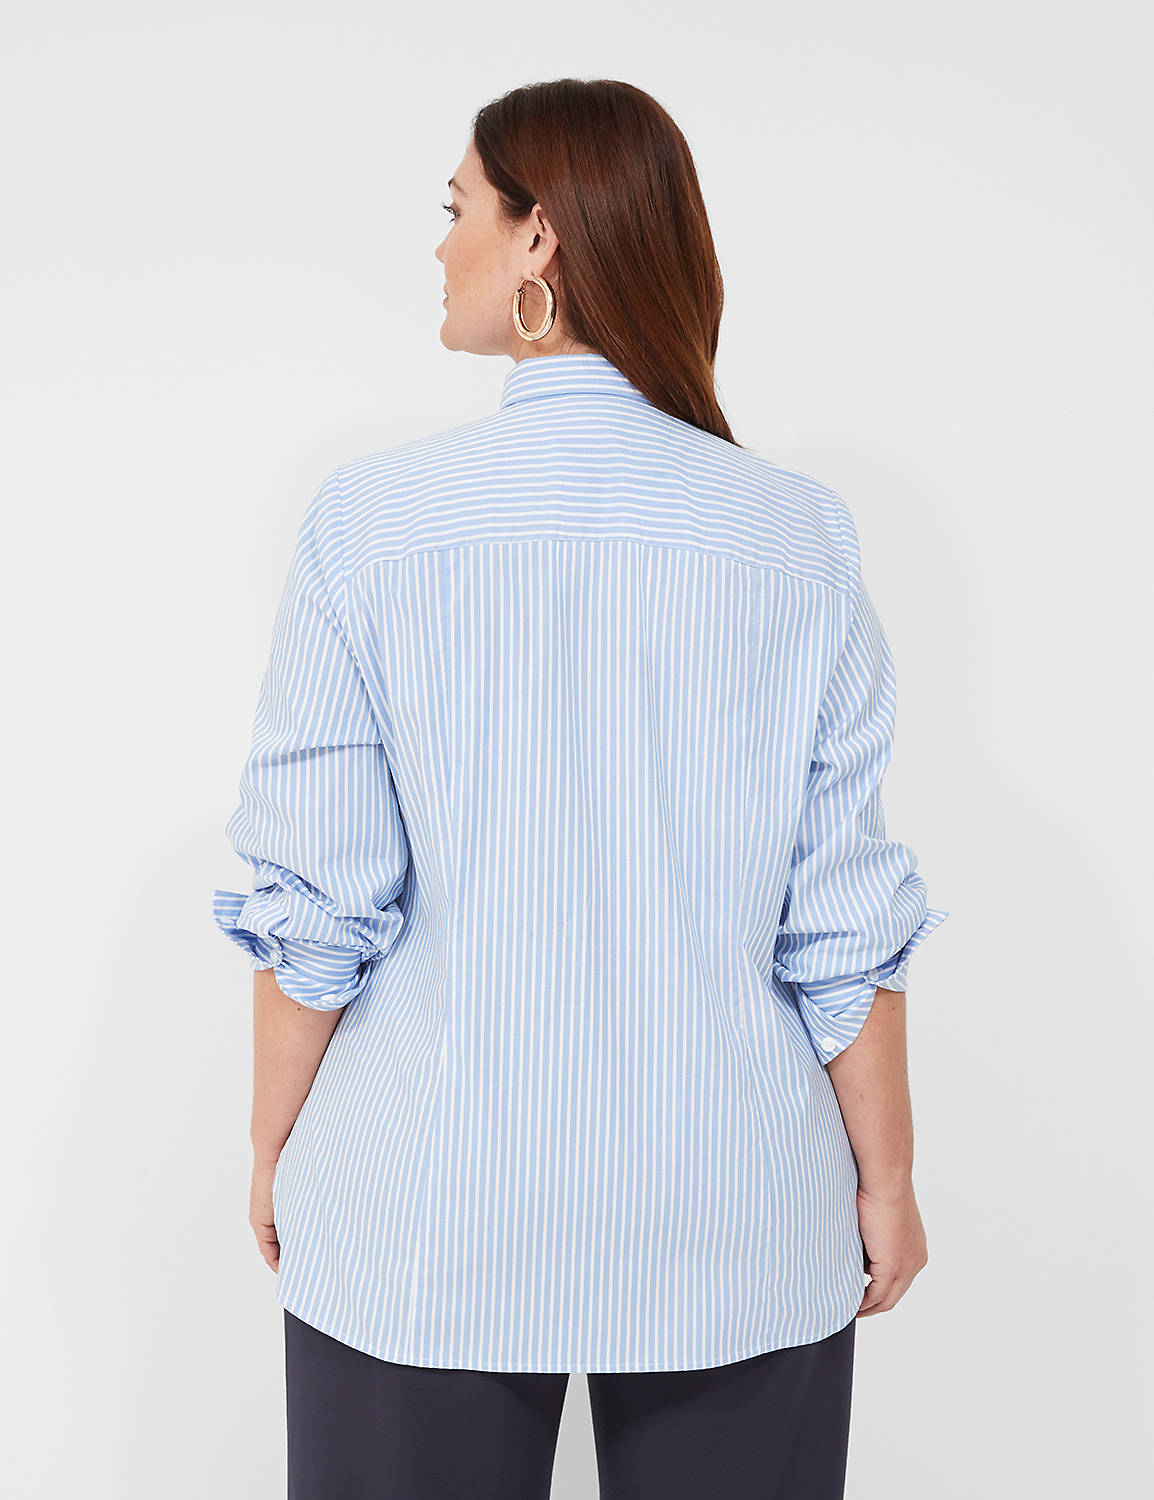 Classic Long Sleeve Button Down Gir Product Image 2